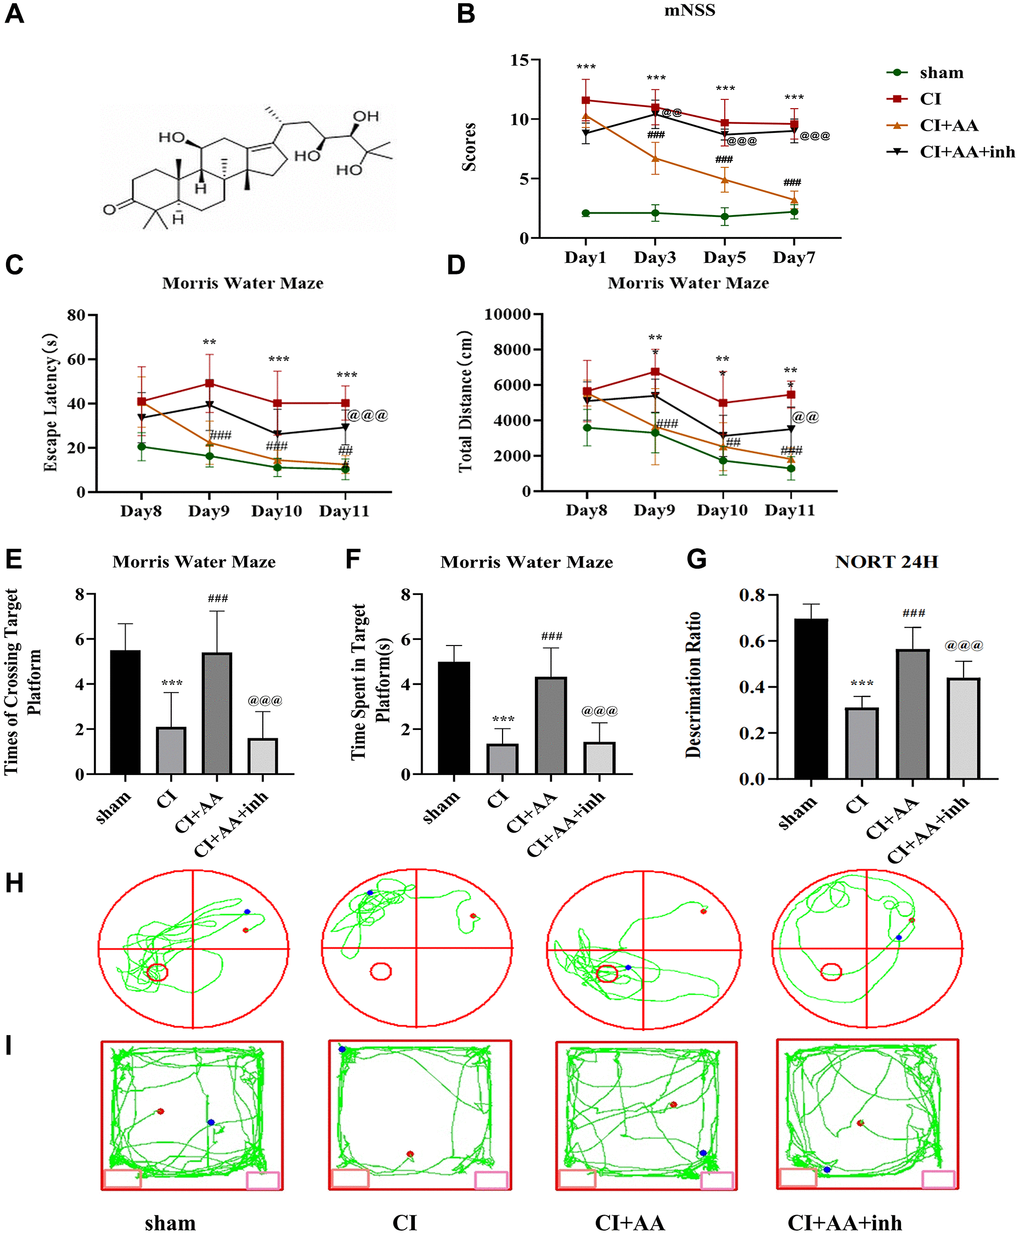 Alisol A improved neurological deficits and cognitive impairment after CI. (A) The molecular formula of alisol A. (B) Neurobehavioral function of mice was evaluated by mNSS at 1, 3, 5, and 7 days after CI, n = 10. (C) Escape latency of each group in the MWM training stage. (D) Total distance traveled by each group in the MWM training stage. (E) Frequency of crossing the target quadrant of each group in the MWM test. (F) Time spent in the target quadrant of each group in the MWM test. (G) Discrimination ratio of each group in NORT. (H) Representative tracking images in the MWM test. (I) Representative tracking images in NORT, n = 10. Data are shown as the mean ± SD. **P ***P ##P ###P @@P @@@P 